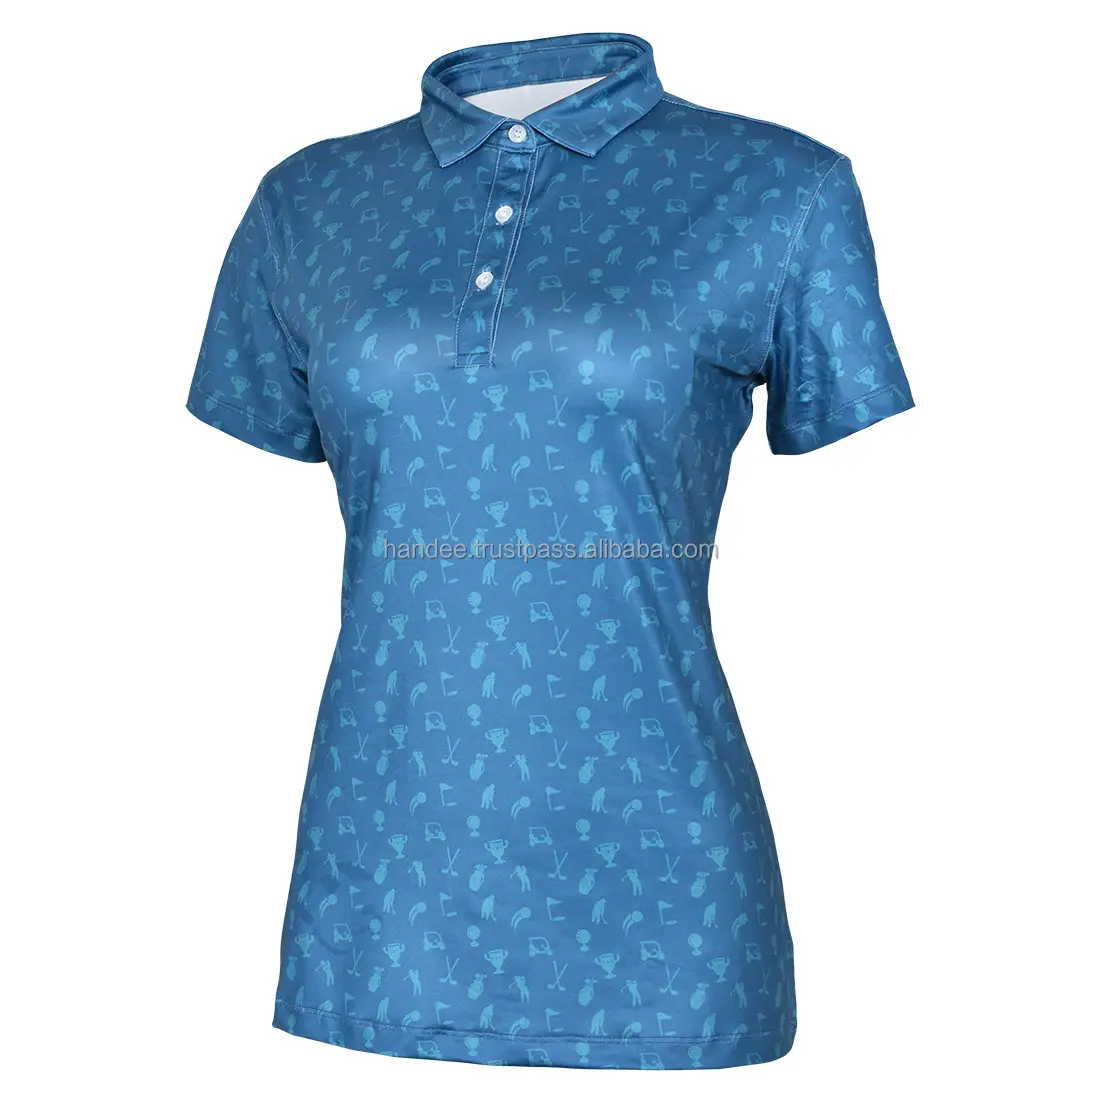 Top Hot Sale Products Slim Fit Golf Shirt Spandex Polyester Cool Max Tshirts Sublimation T shirts Plain Custom Printing